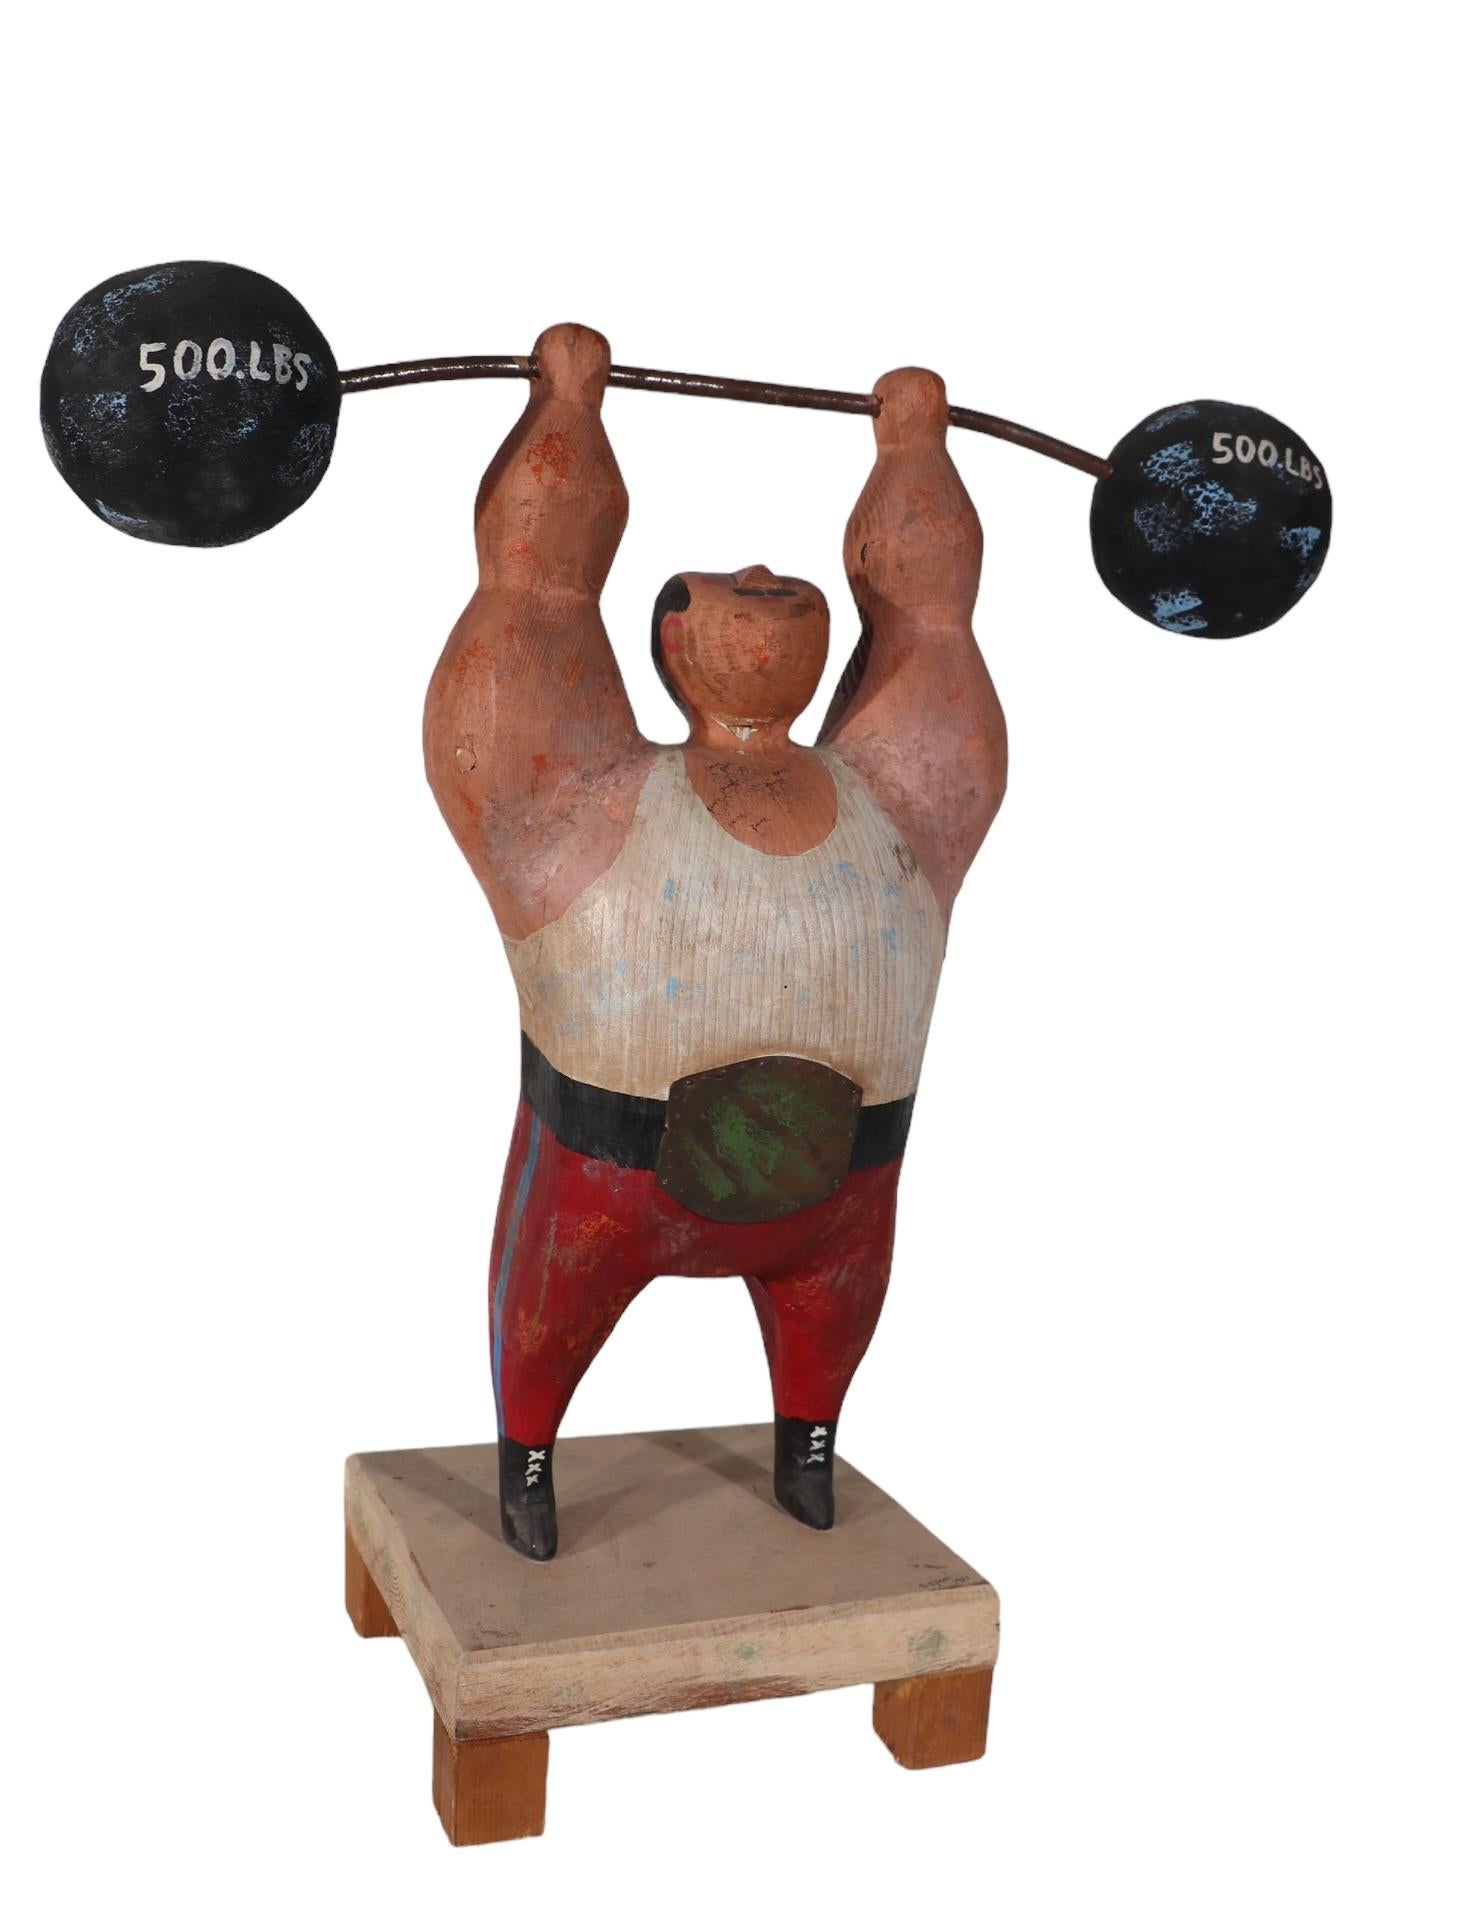 Hand-Painted Rare Jere Wood Sculpture of Weightlifter signed C.Jere  and dated 1982